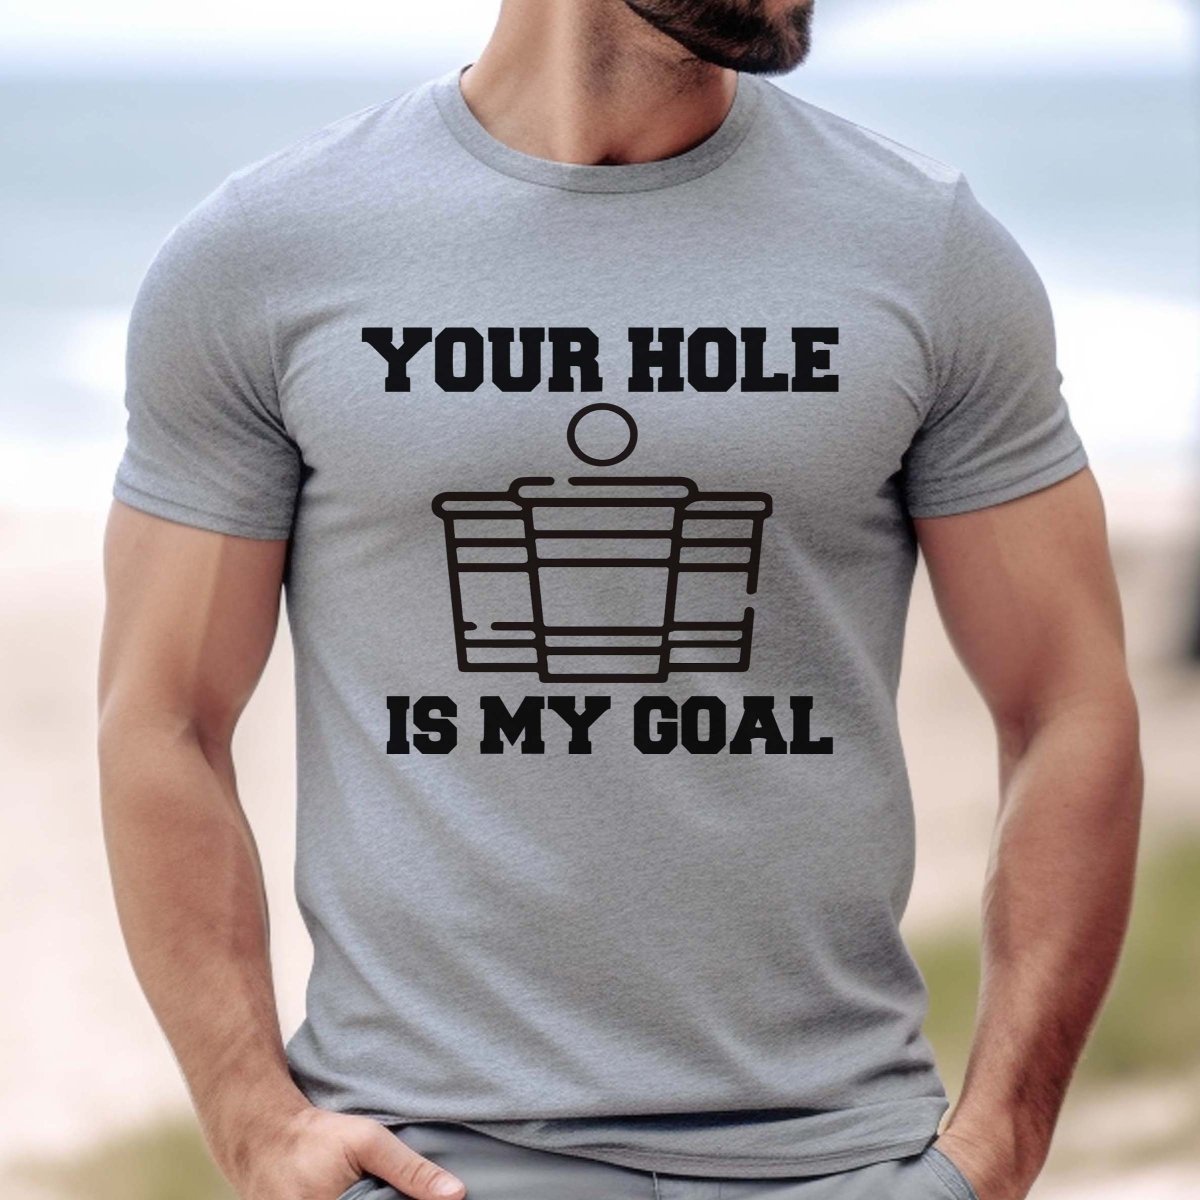 Your Hole is My Goal tee - Limeberry Designs